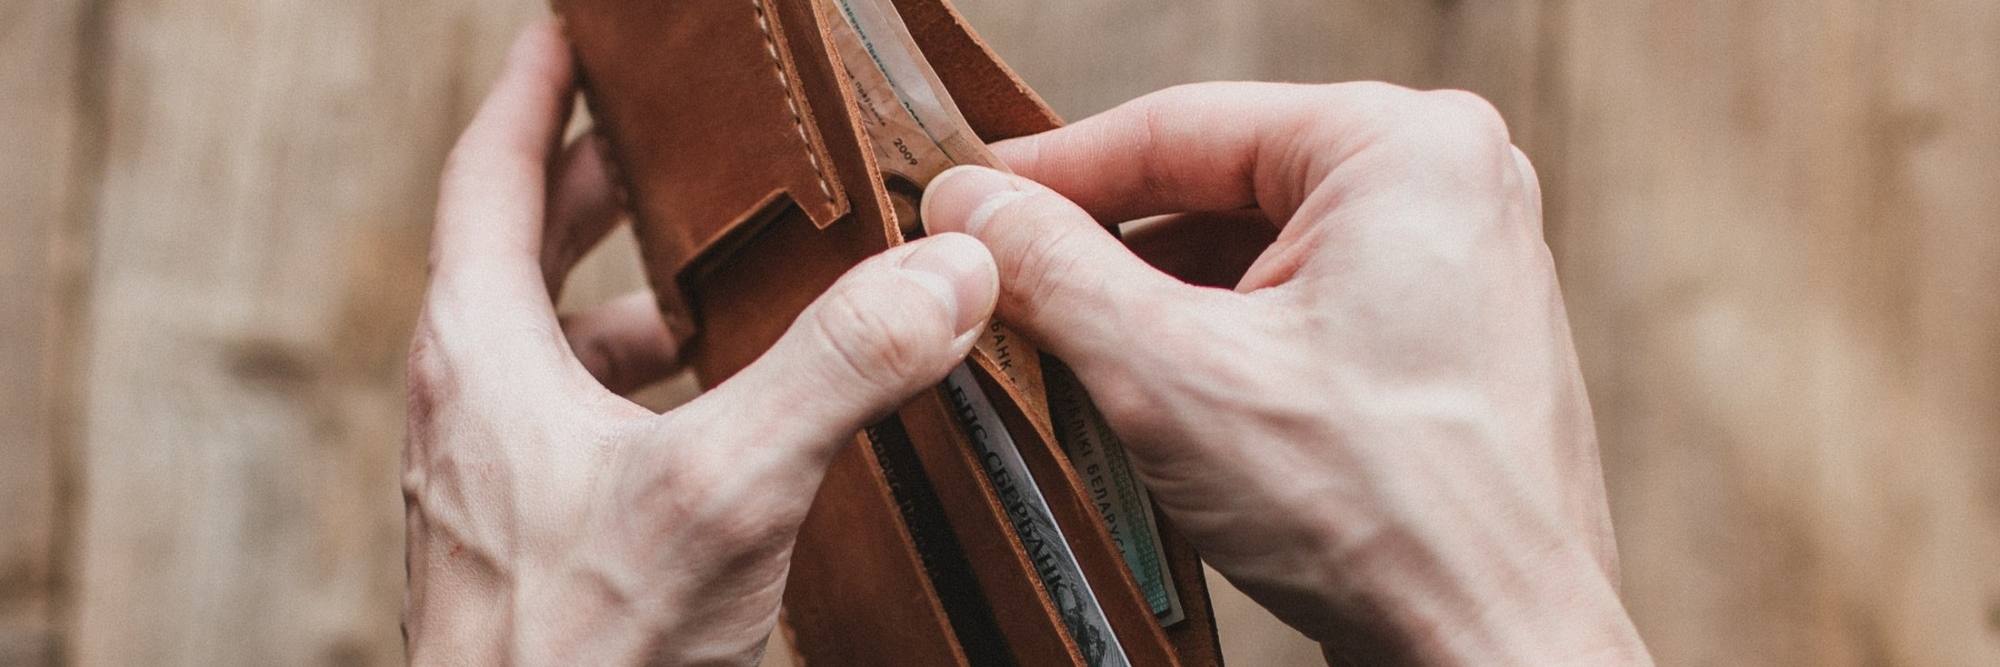 A person holding a brown leather bifold wallet in two hands holding onto a bank note.